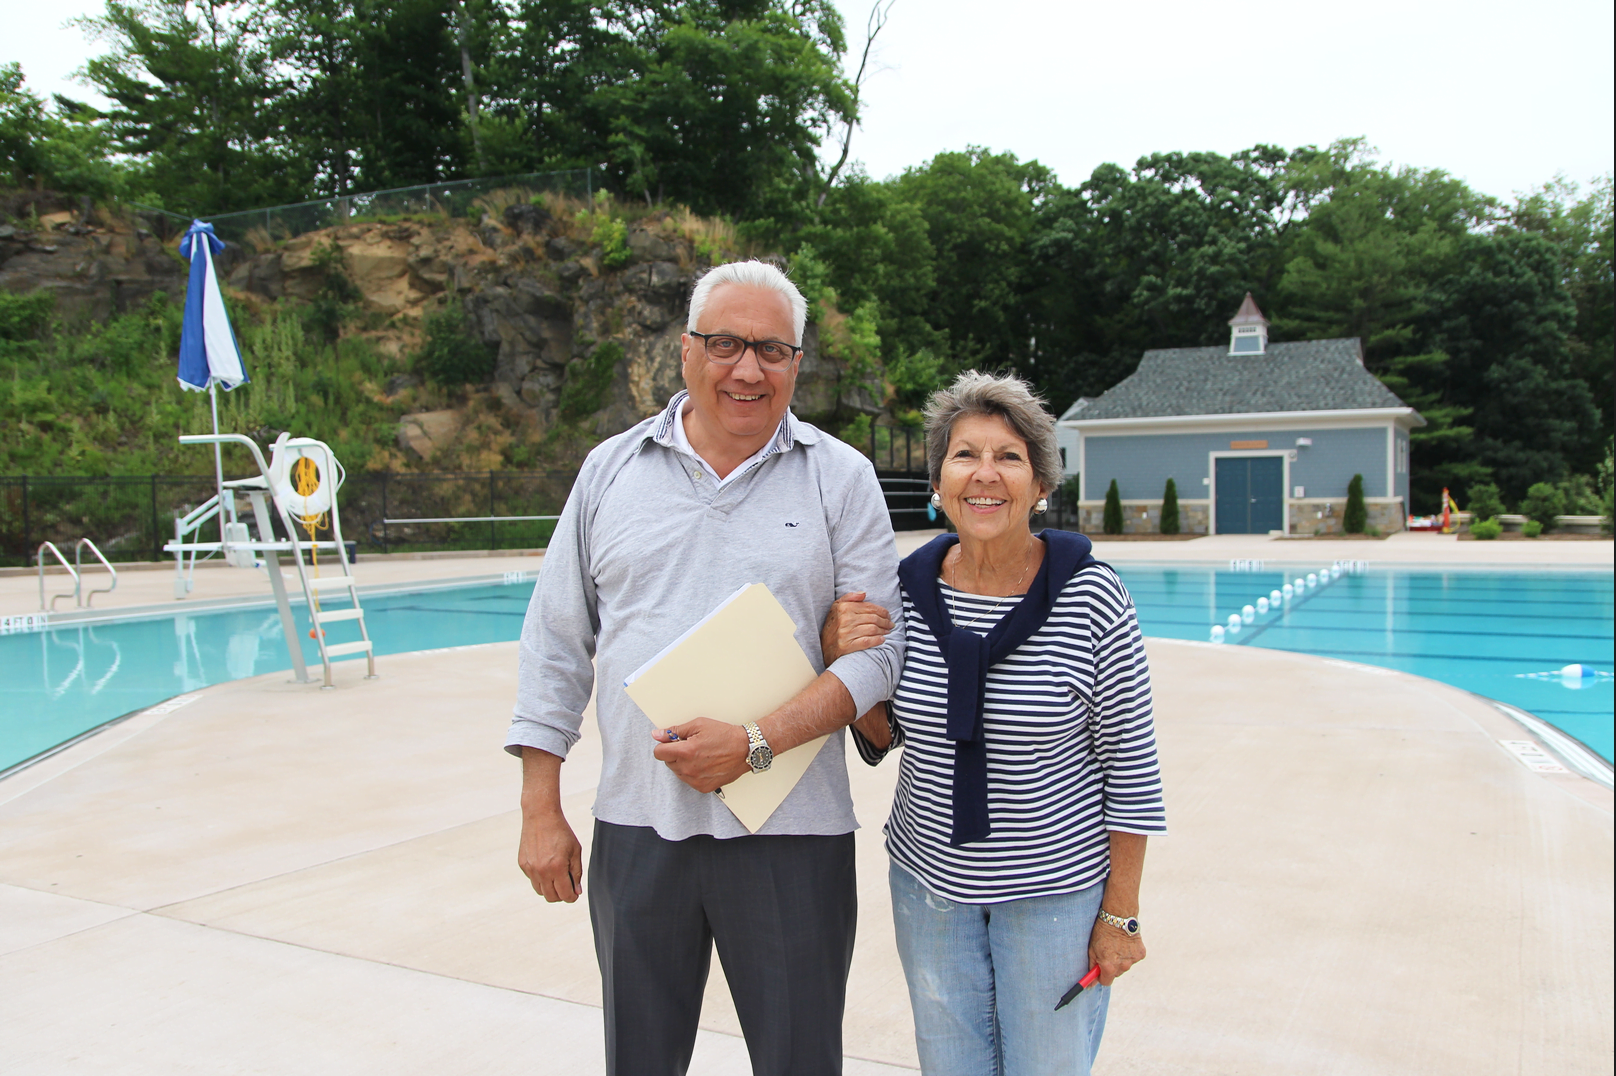 Greenwich Pool at Byram Park. June 27, 2018 Photo: Leslie Yager